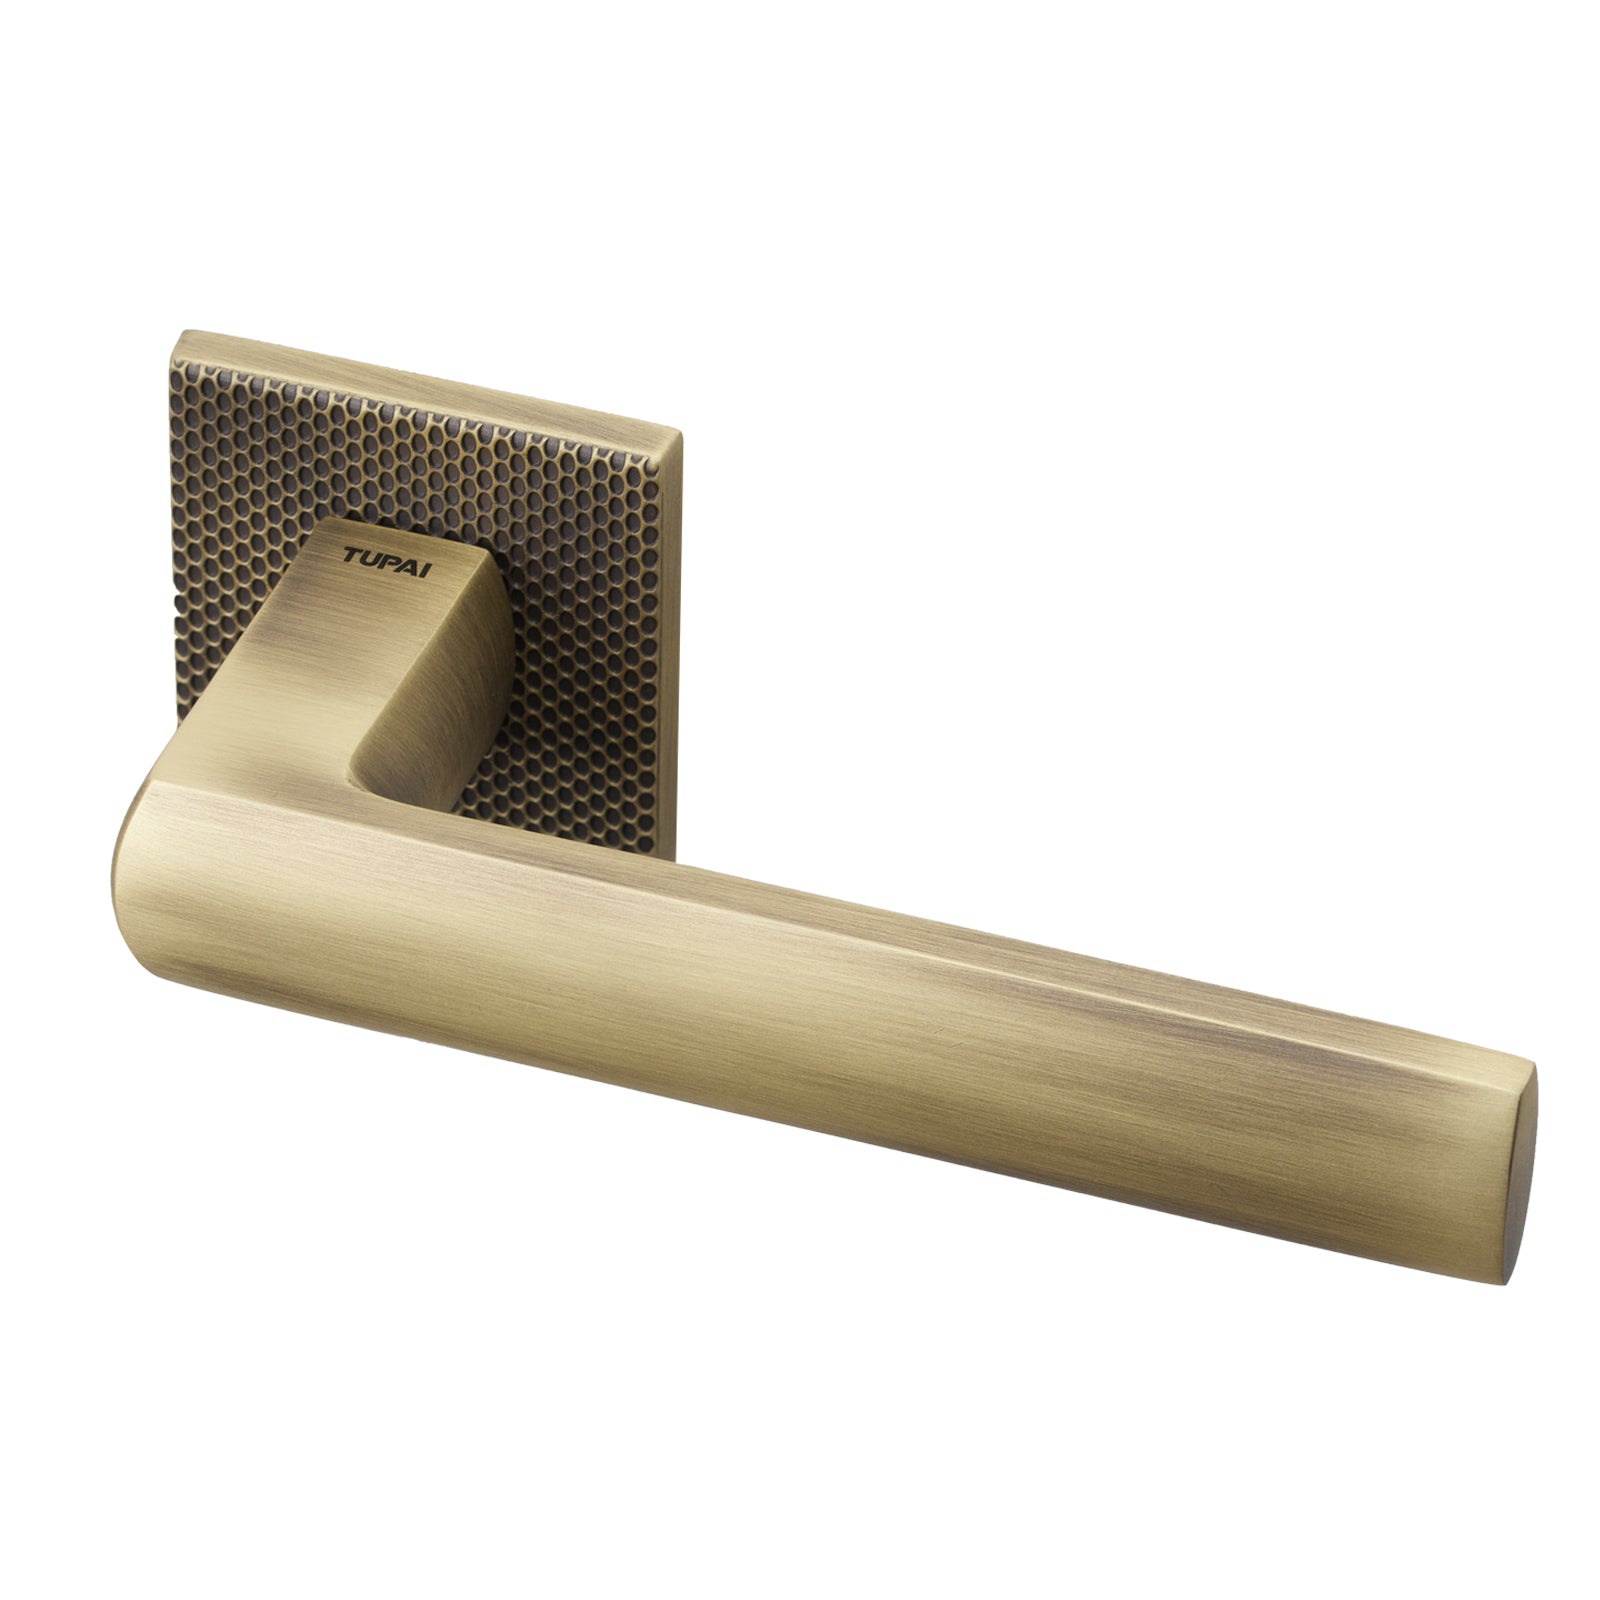 Coroto Waterfall Texture Lever on Rose Door Handle in Antique Brass Finish SHOW